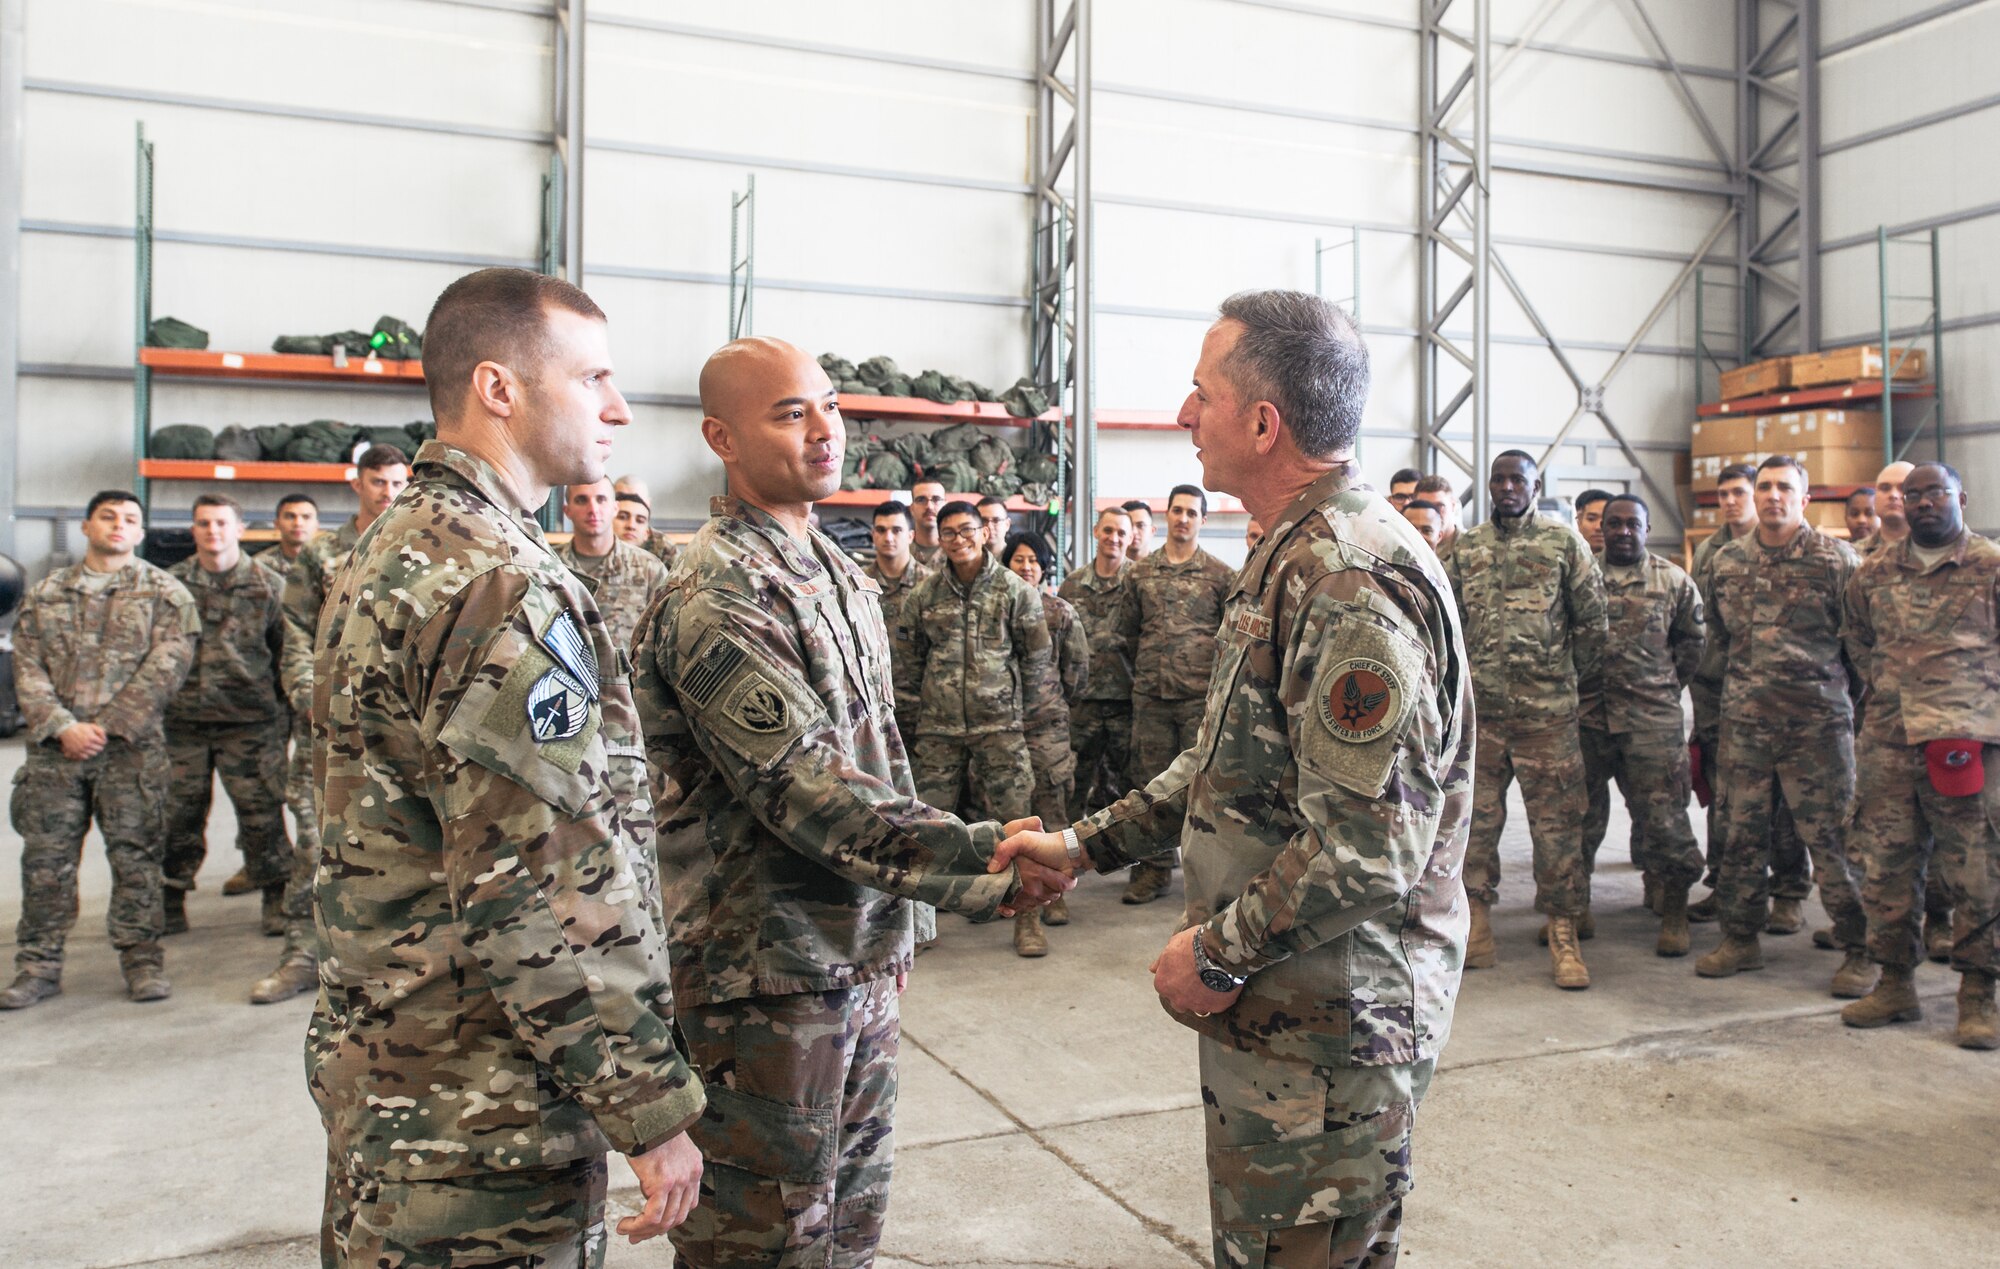 Air Force Chief of Staff Gen. David L. Goldfein congratulates a deployed Airman for outstanding performance at an undisclosed location in Southwest Asia, Dec. 22, 2018. Goldfein traveled throughout the U.S. Central Command's area of responsibility recognizing the selfless service of Airmen and reminding them to take ownership of their Air Force every single day. (U.S. Air Force photo by Staff Sgt. Jordan Castelan)